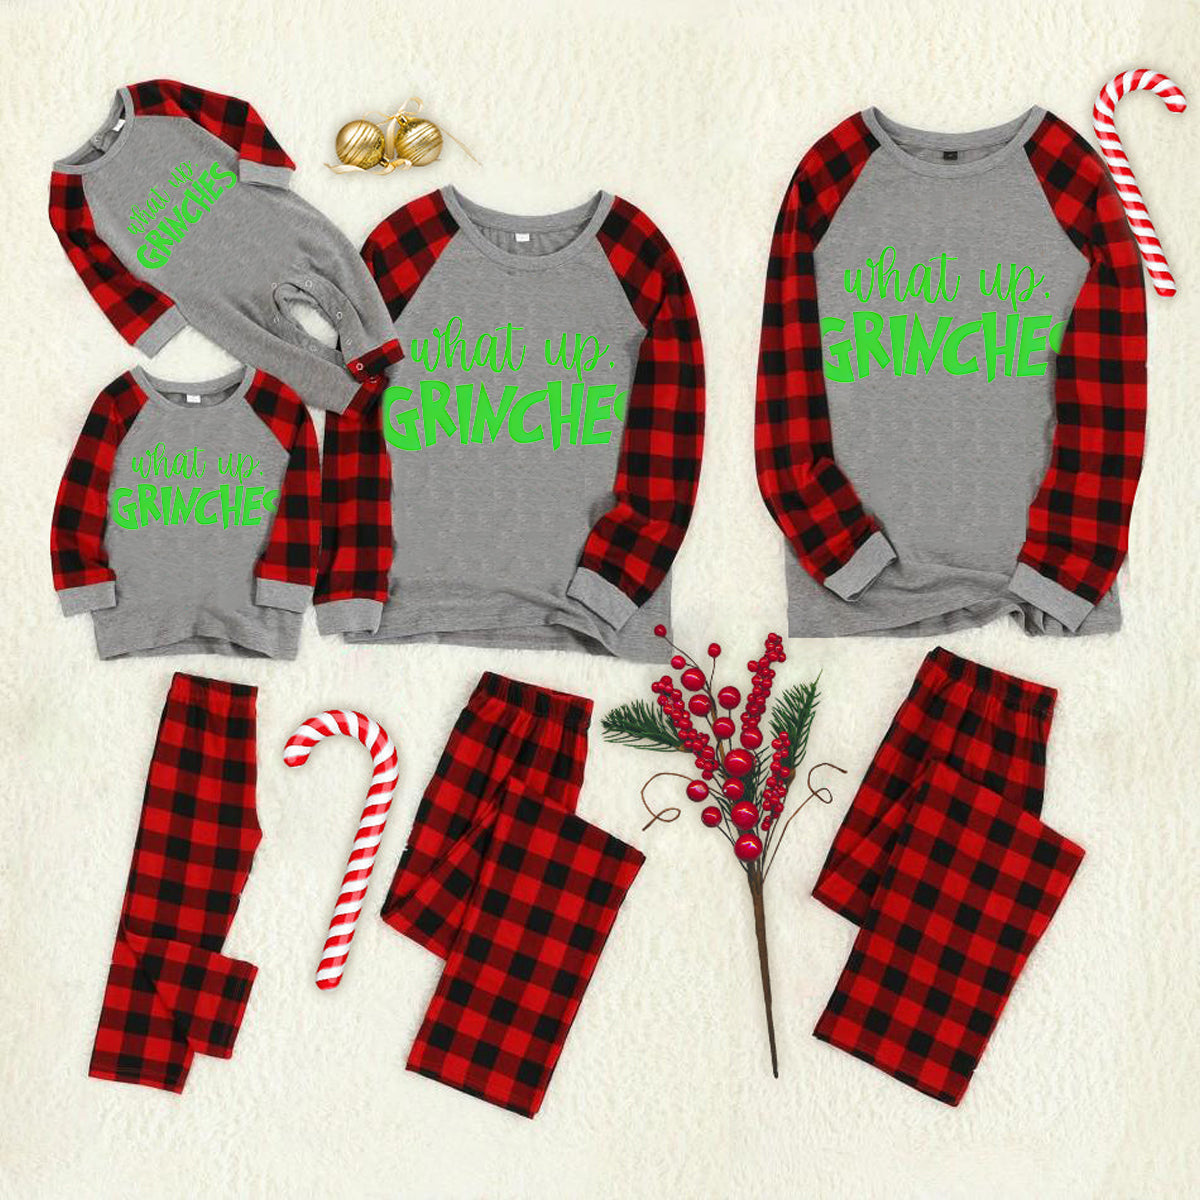 Christmas 'What Up' Letter Print Grey Contrast Top and Black & Red Plaid Pants Family Matching Pajamas Set With Dog Bandana